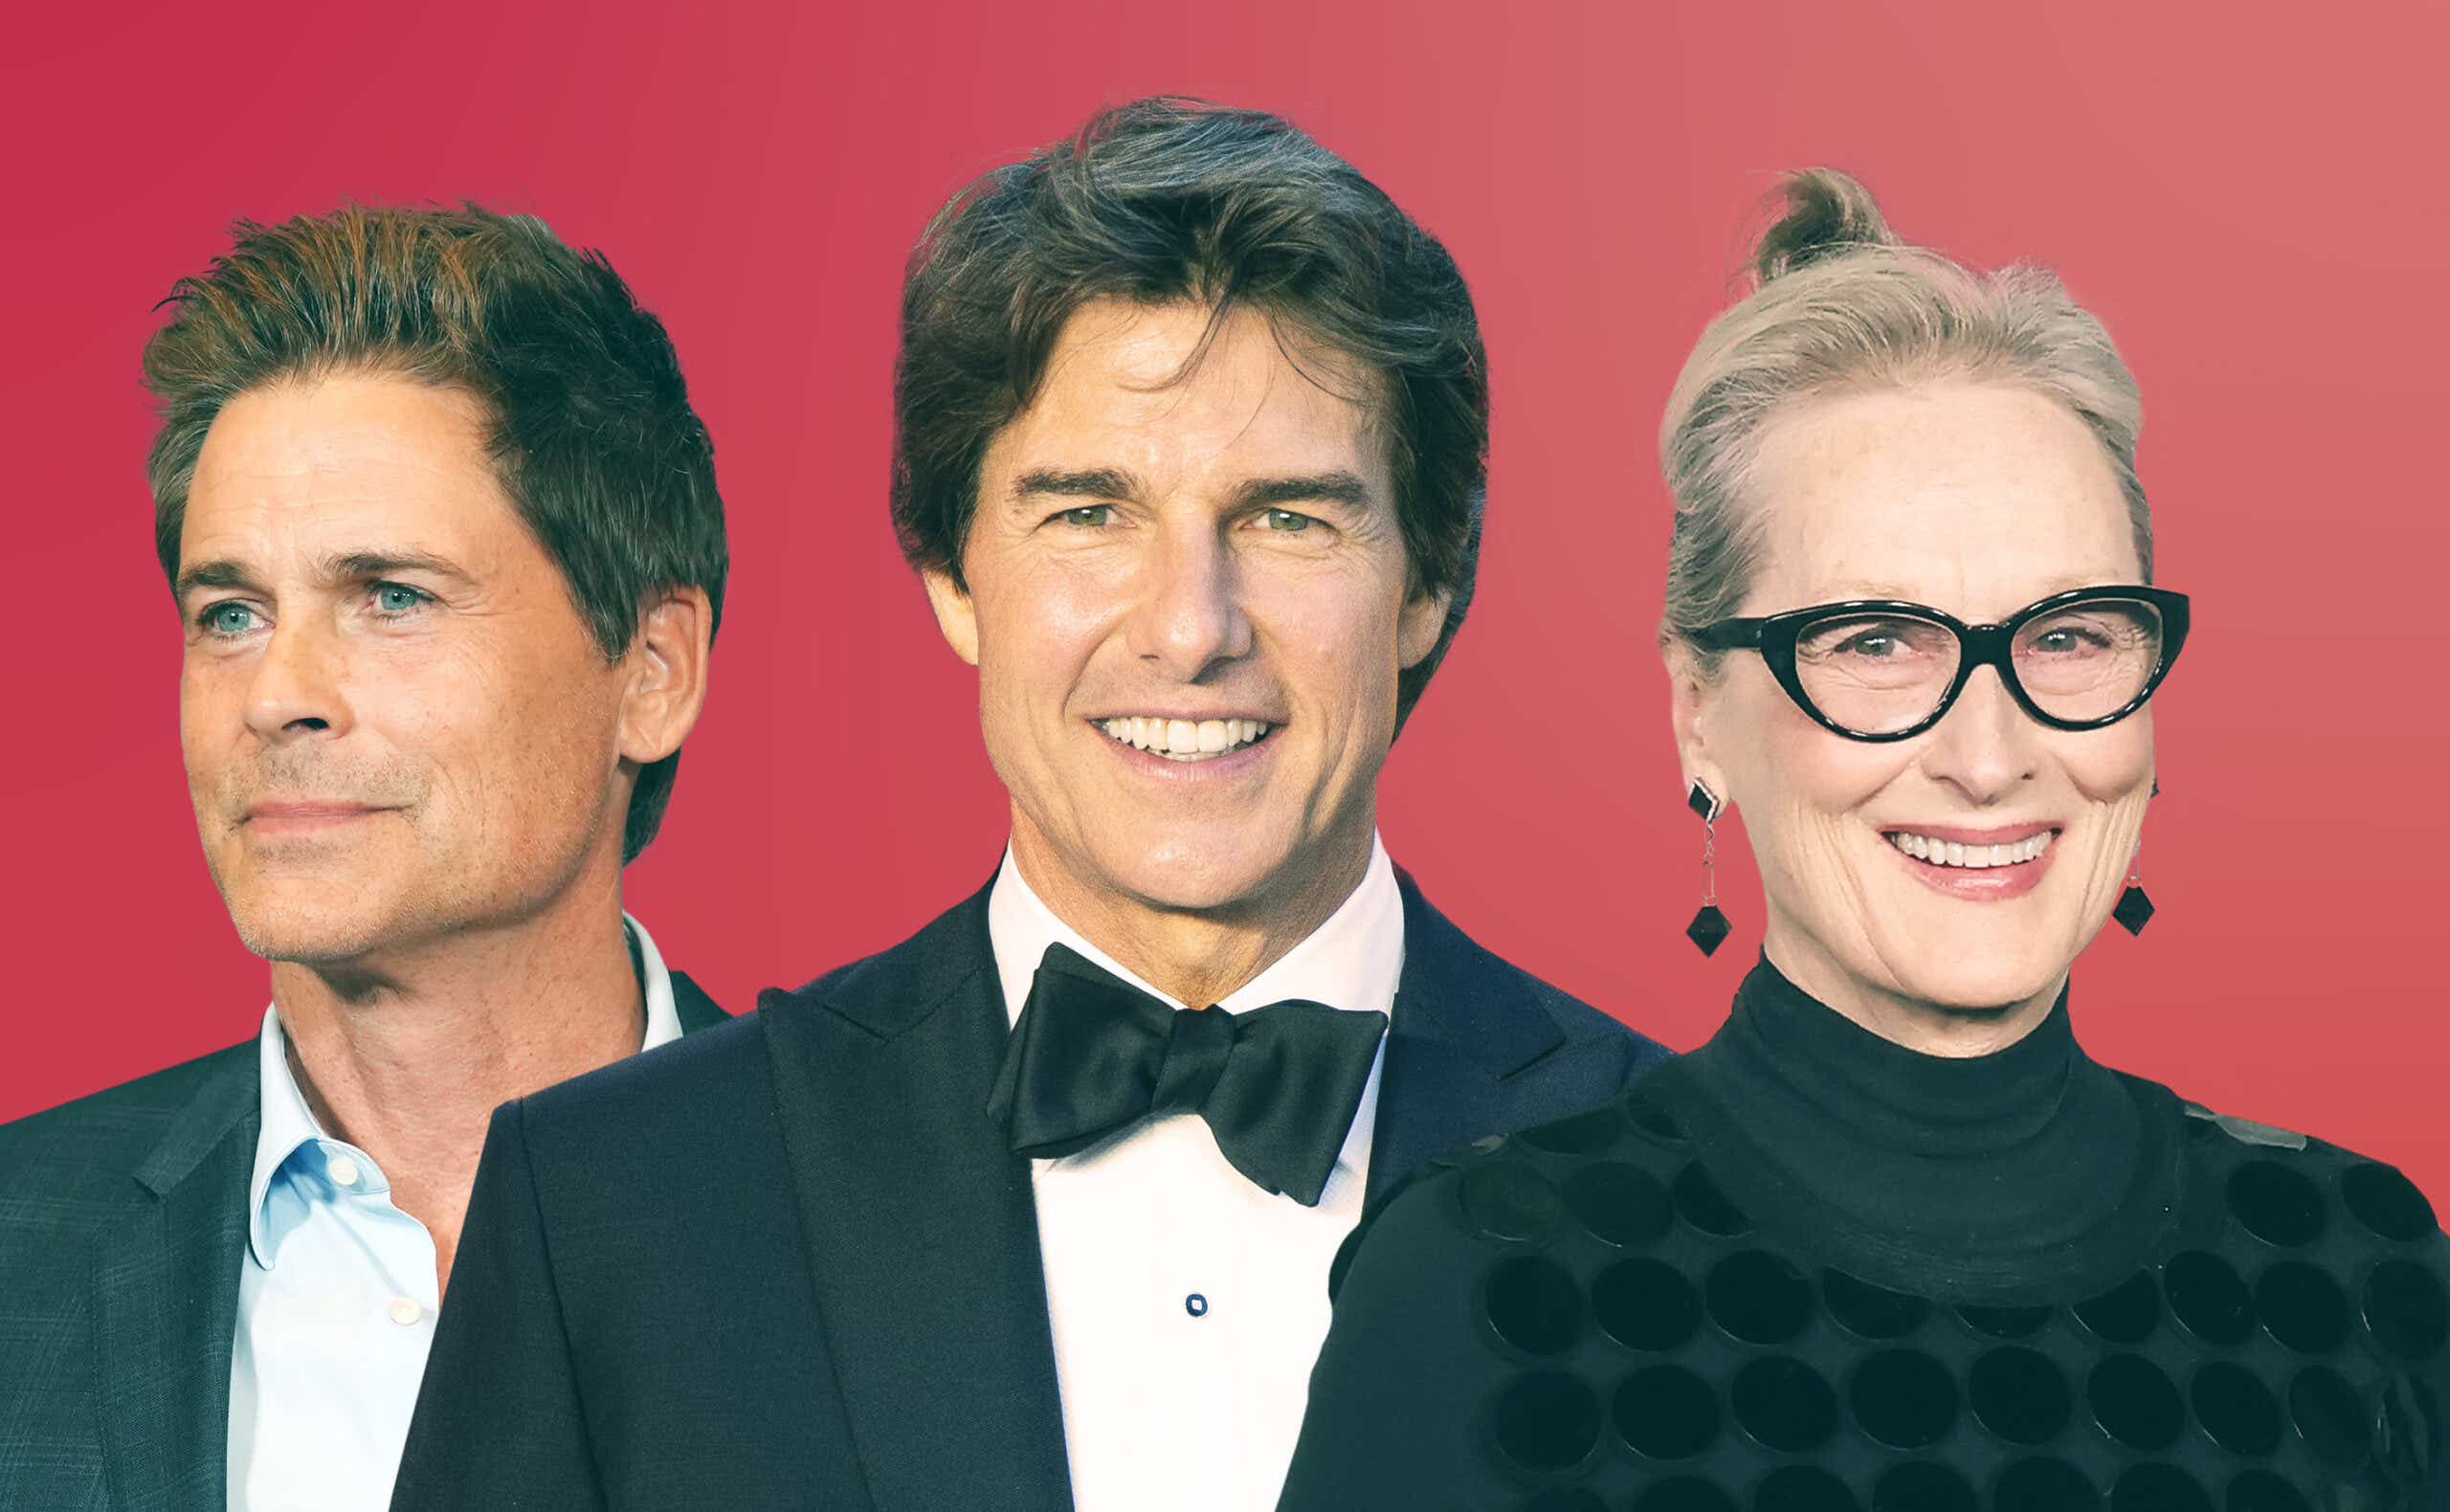 Actors Tom Cruise, Meryl Streep, and Kevin Bacon are pictured in front of a red background.